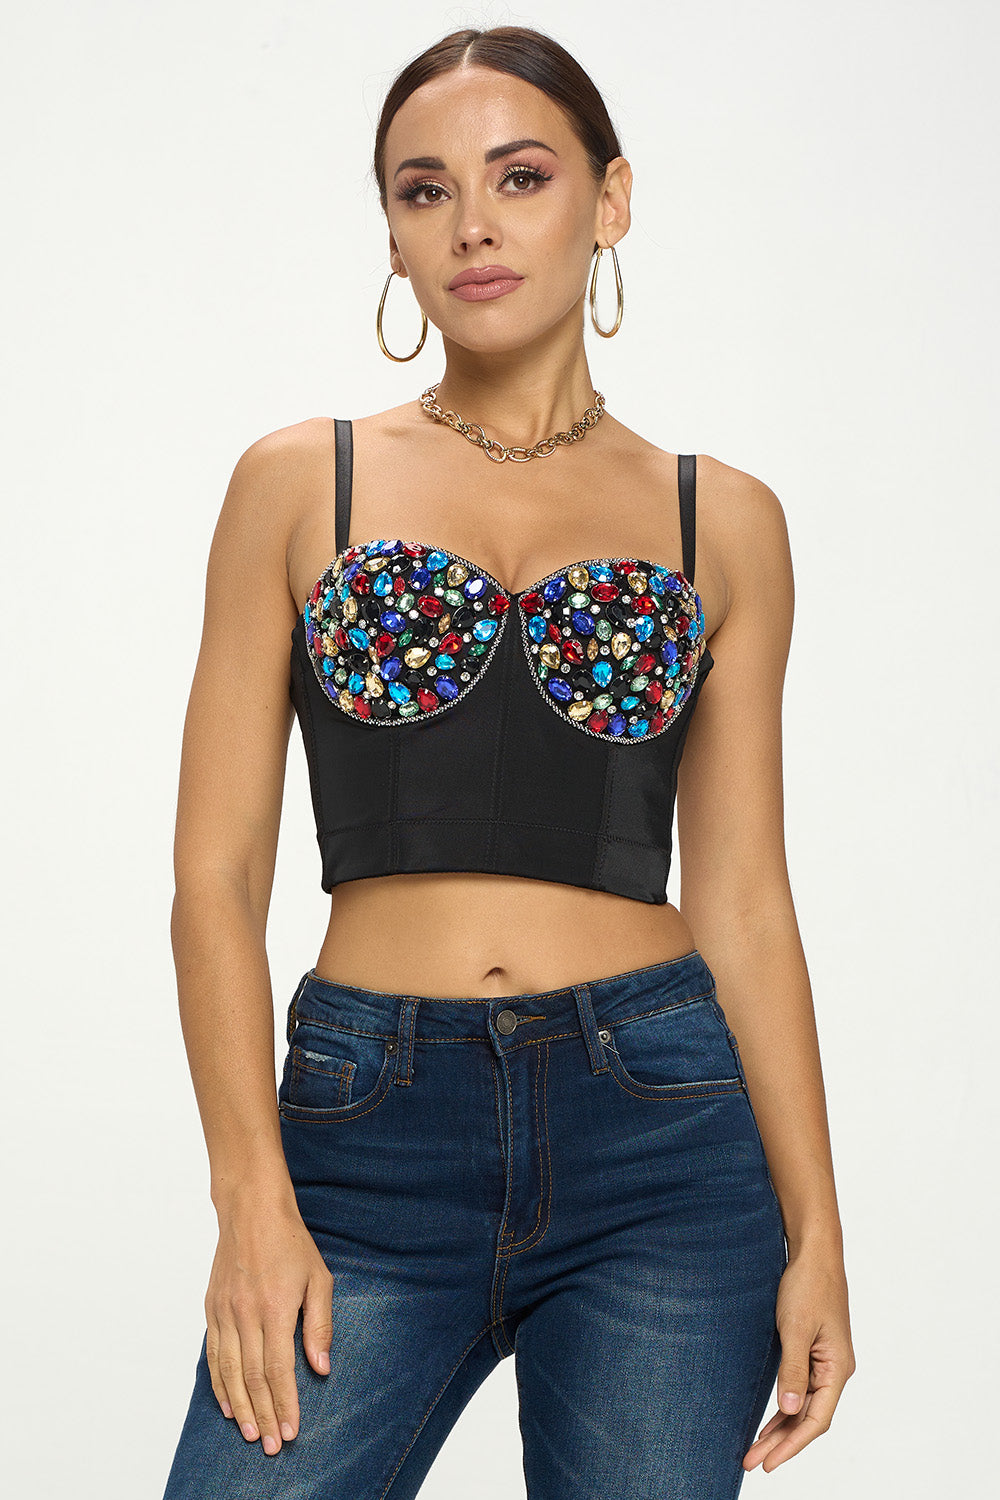 MULTI-COLORED CRYSTAL STONE EMBELLISHED BUSTIER TOP